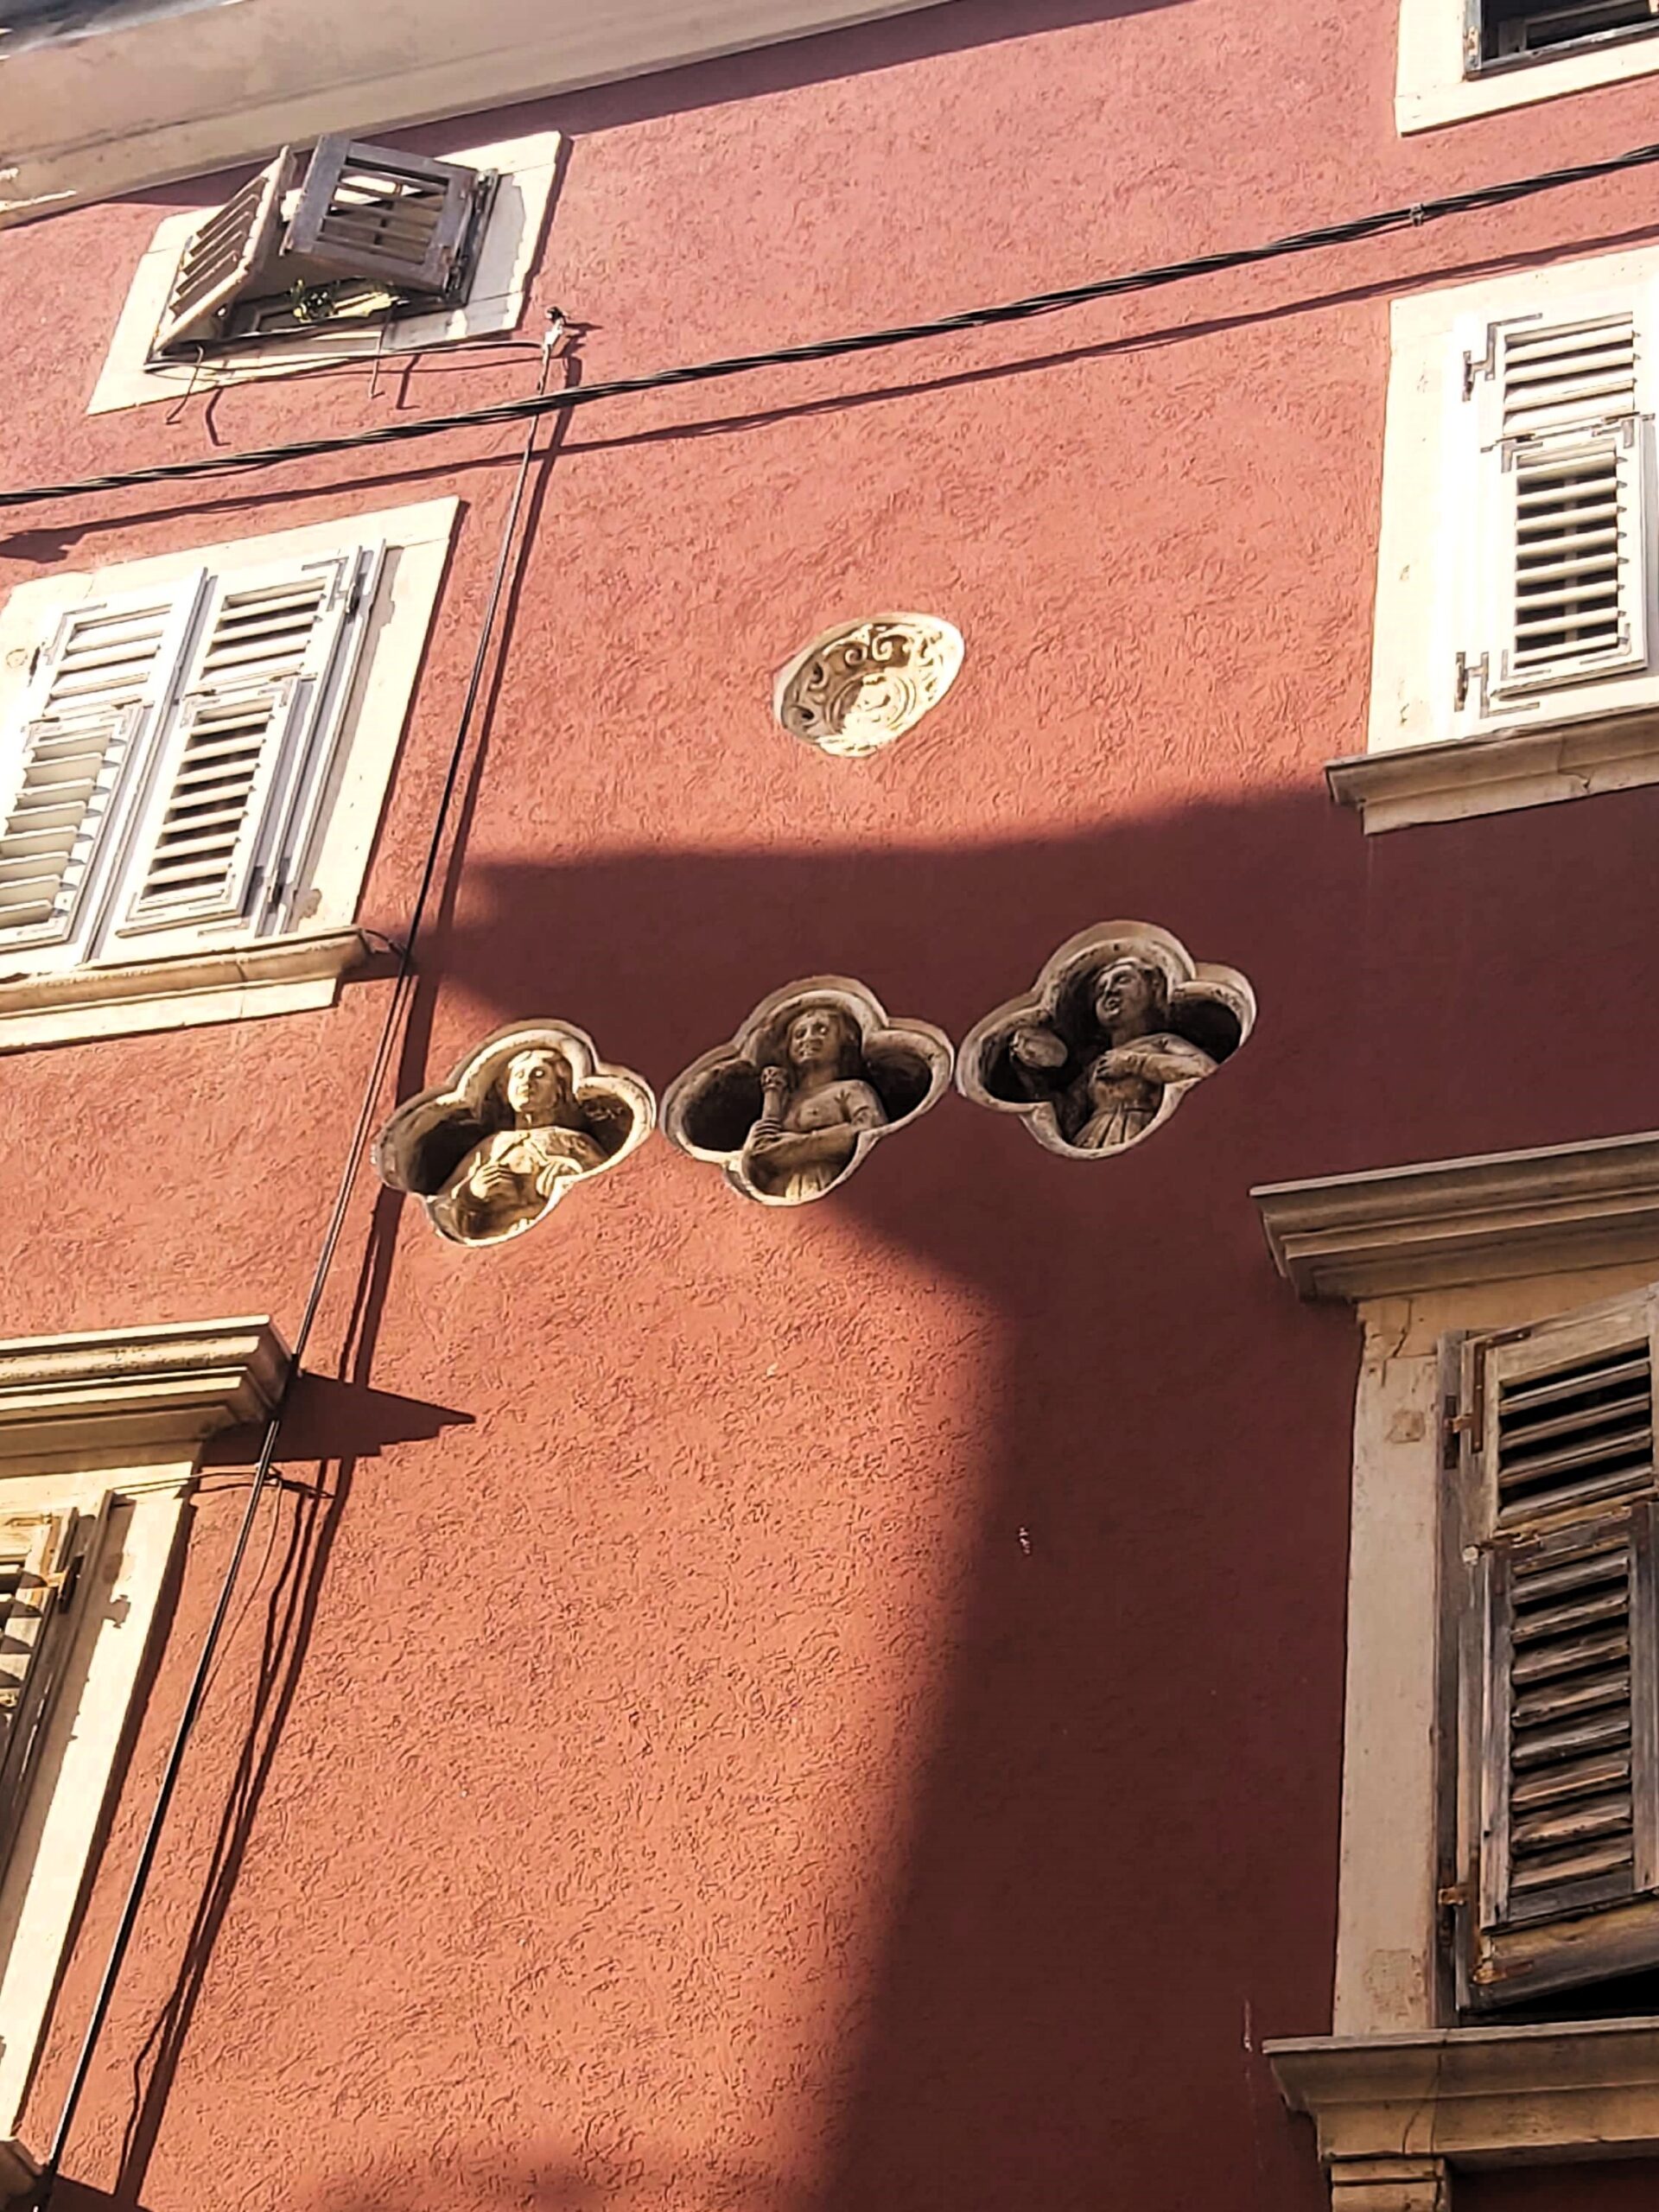 3 white statuettes embedded in a red walled building, Pula, Croatia